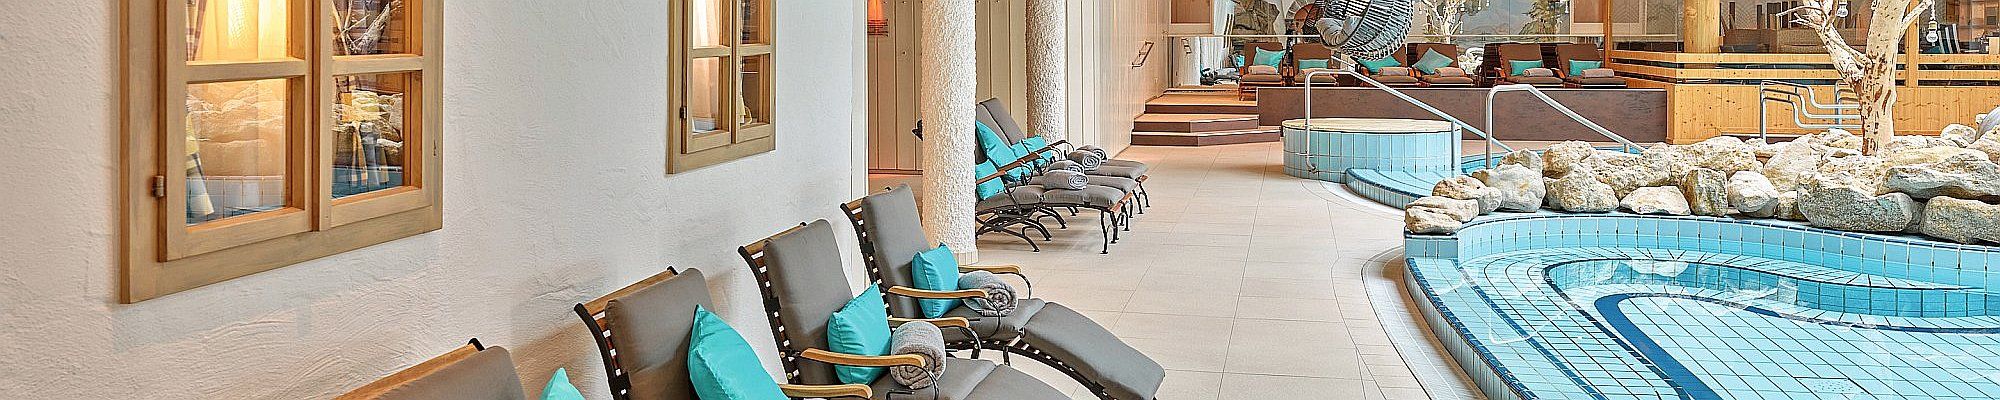 Parkhotel Bad Griesbach - Wellness